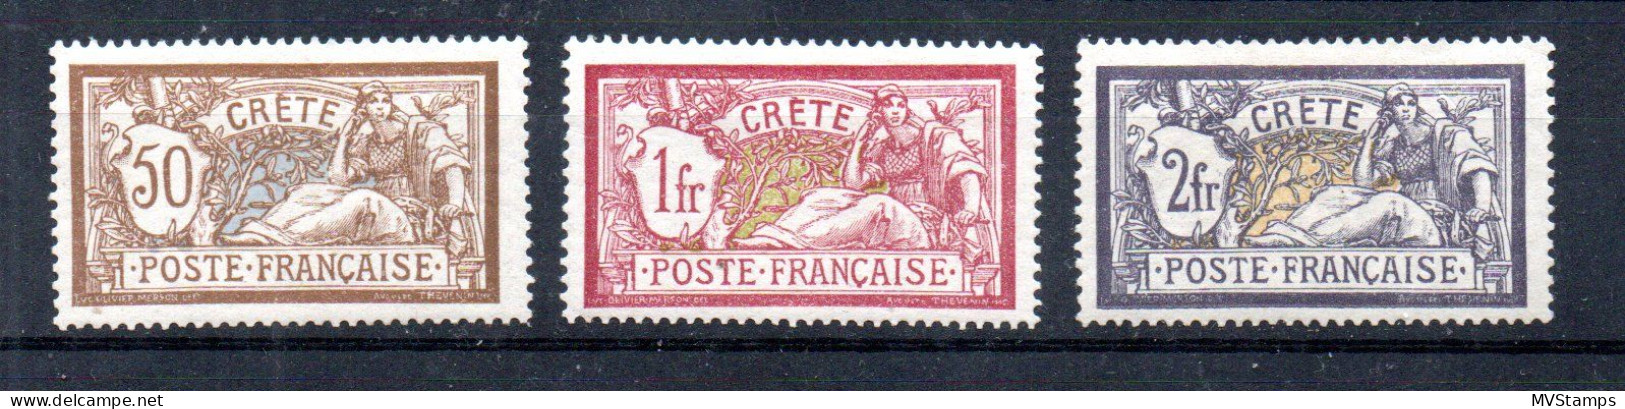 France Post In Crete 1902 Old Definitive Stamps (Michel 12/14) MLH - Unused Stamps